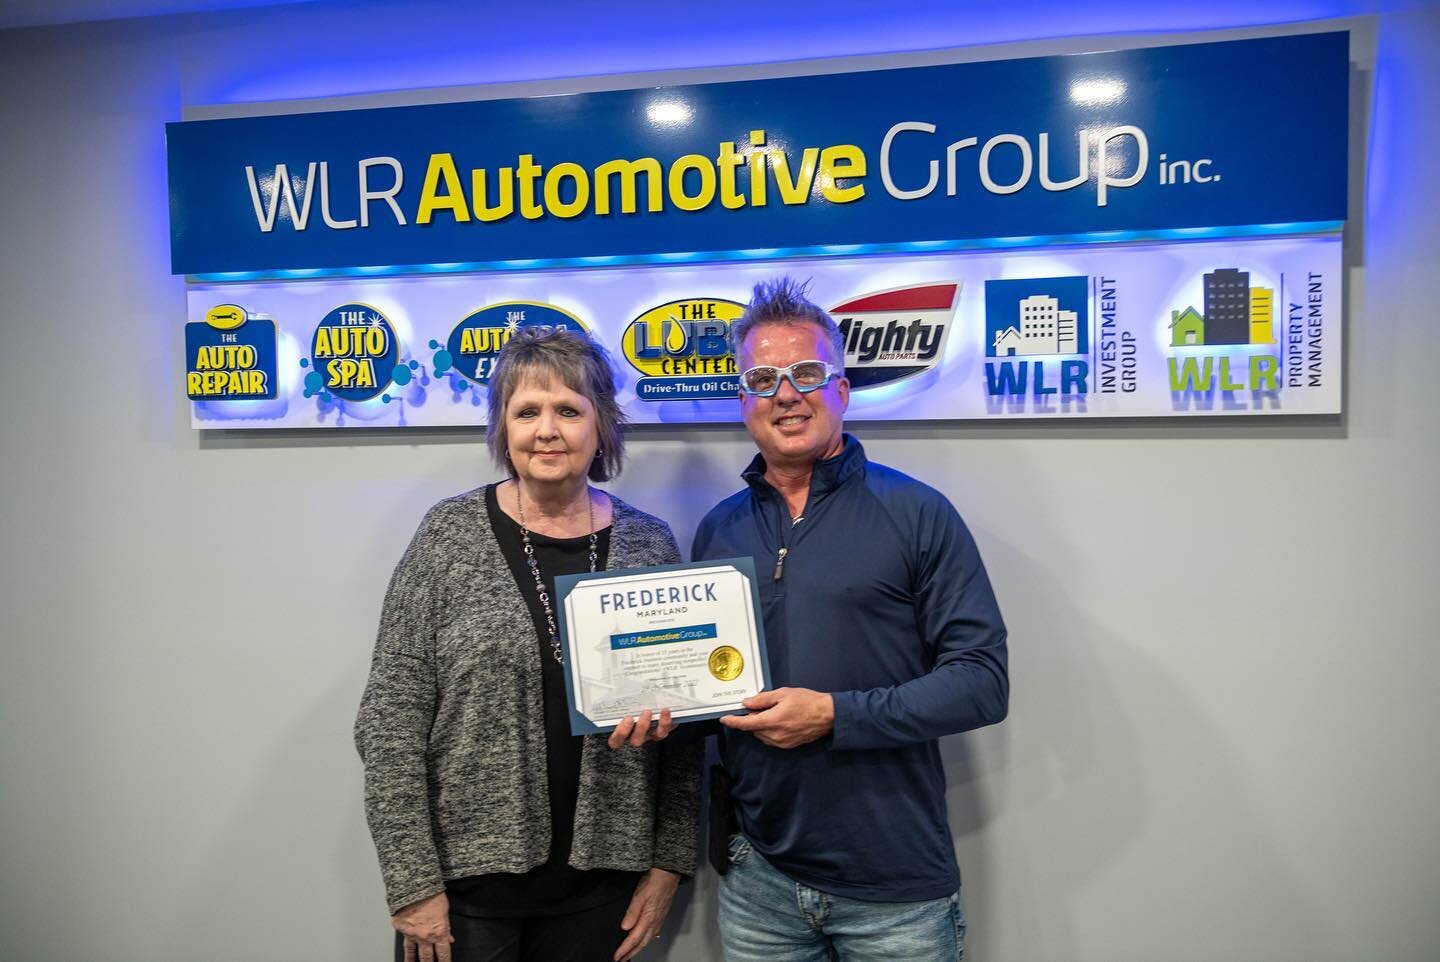 The WLR Automotive Group celebrates 35 years in business.

The company opened in 1987 with its first Lube Center right here in Frederick along Route 40. The business has since grown to 32 locations, including Lube Centers, Auto Spas, Auto Spa Express